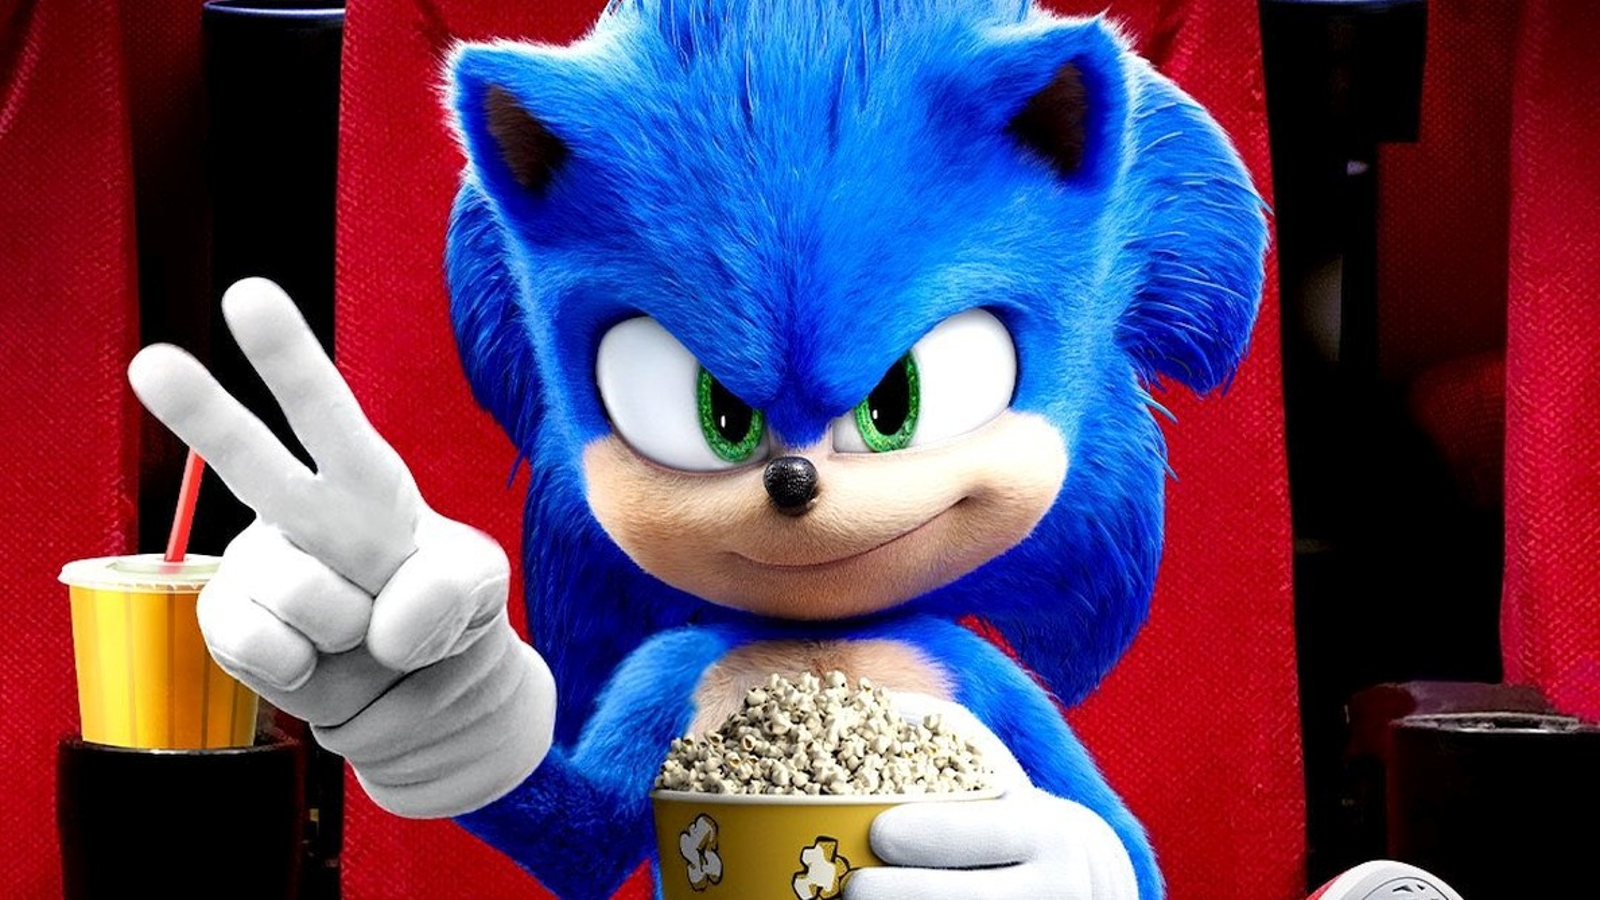 How In The World Is The 'Sonic The Hedgehog' Movie Actually Good?